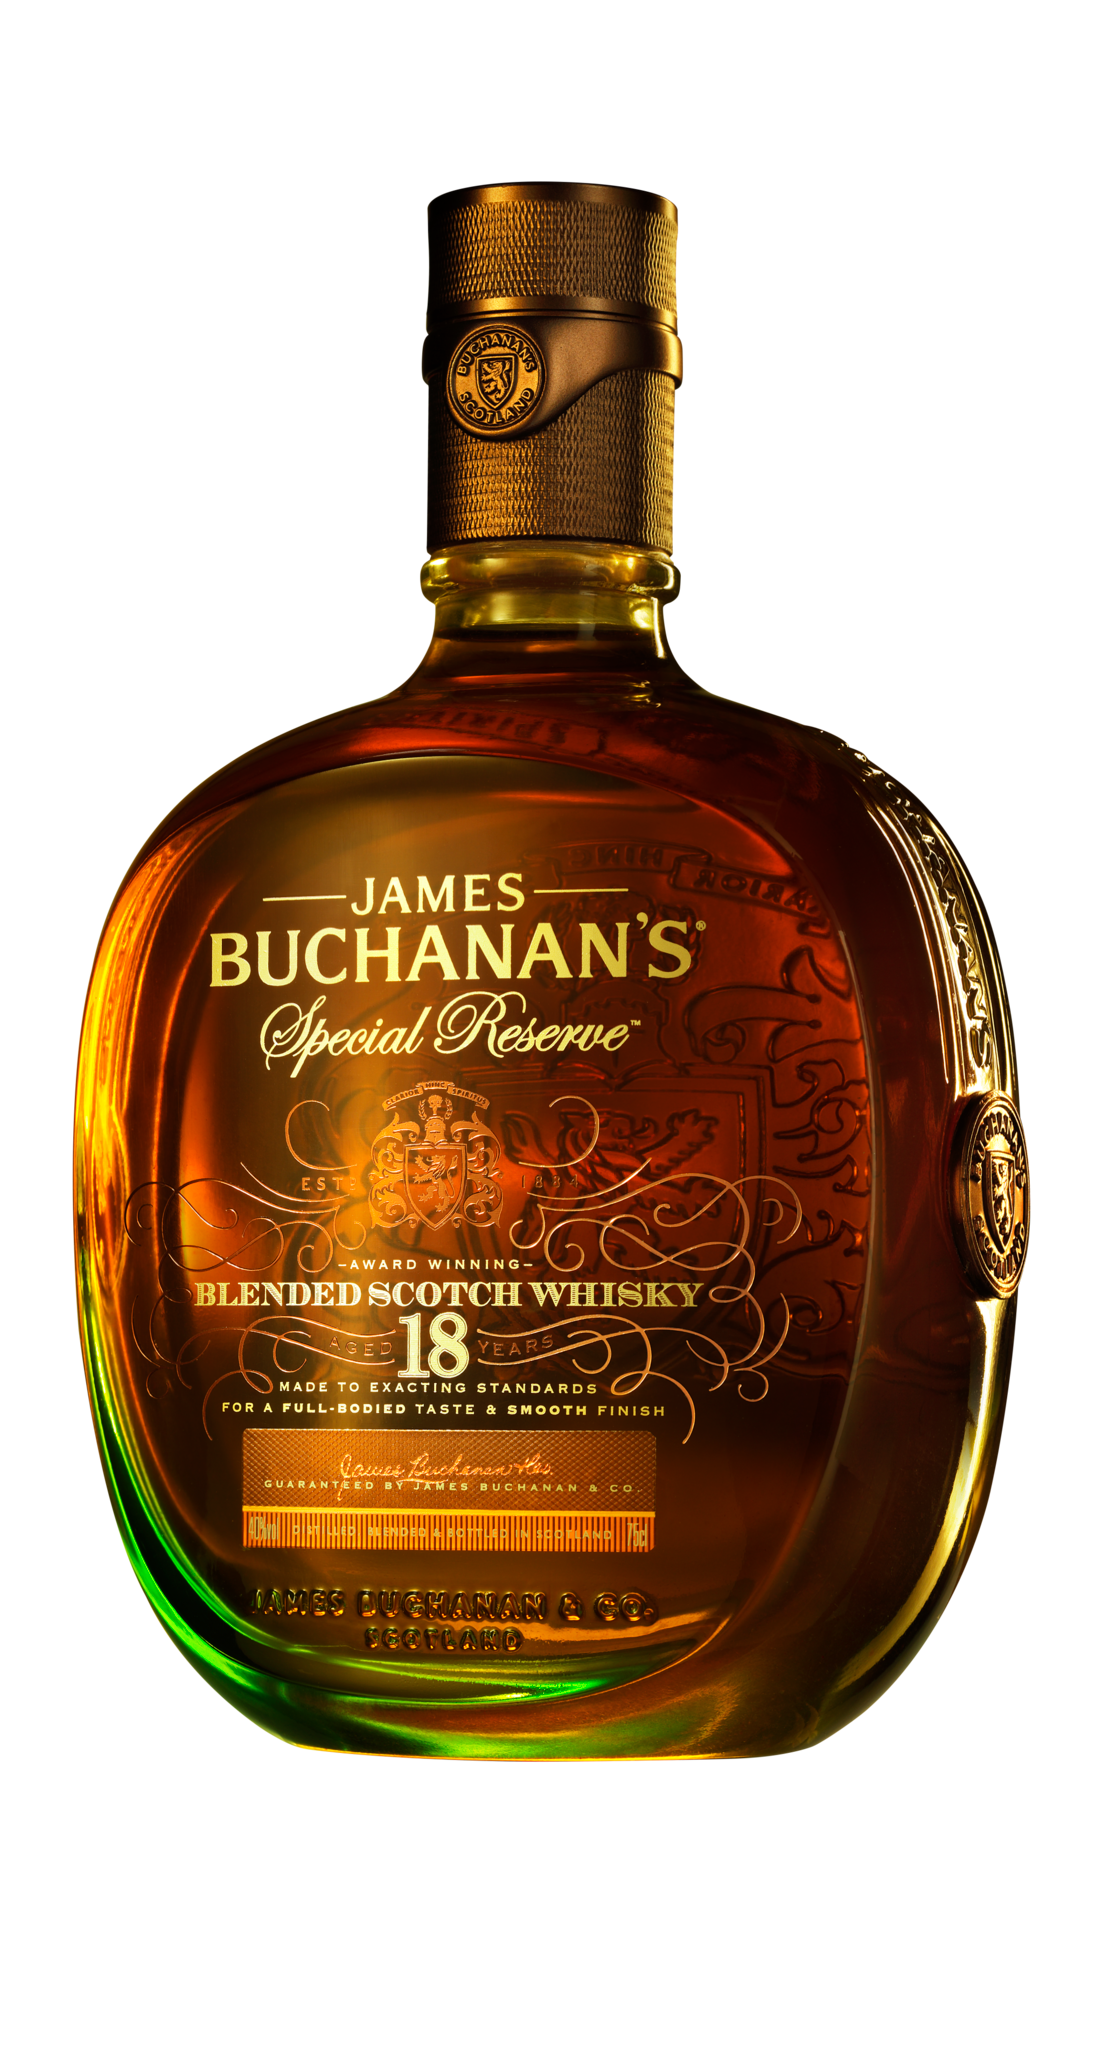  Buchanan's 18-Year-Old Special Reserve Blended Scotch Whisky